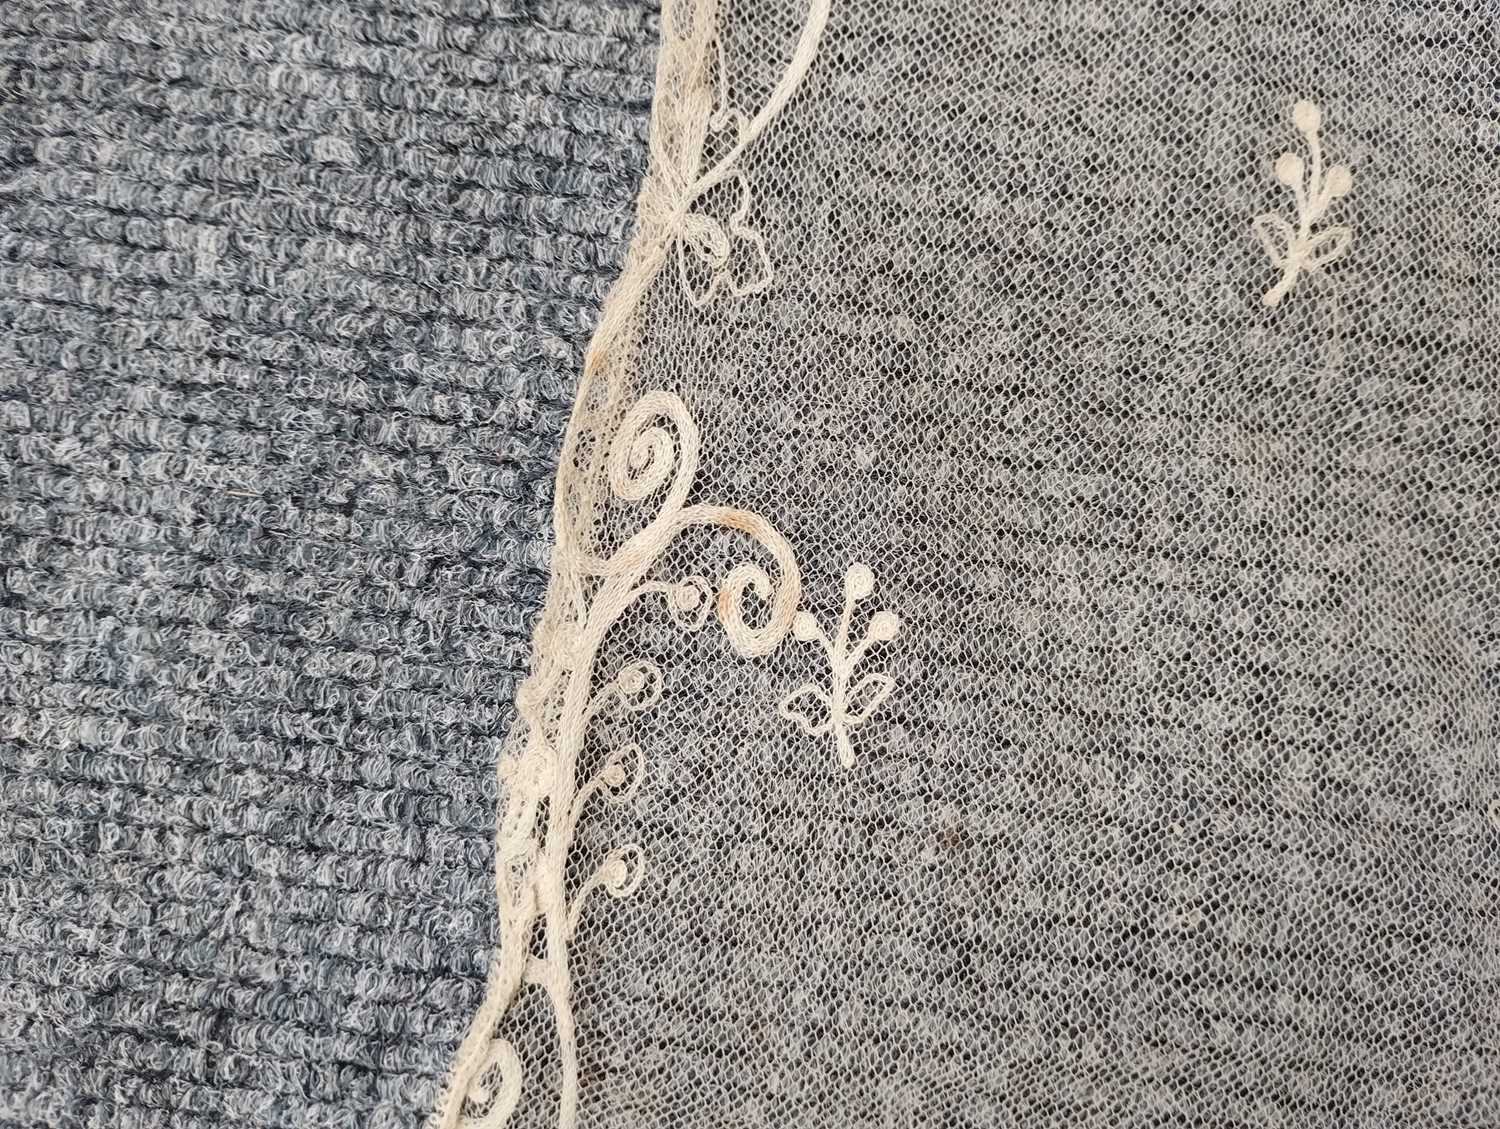 Early 20th Century Lace comprising a flounce with appliquéd flower heads and motifs within a - Image 20 of 32